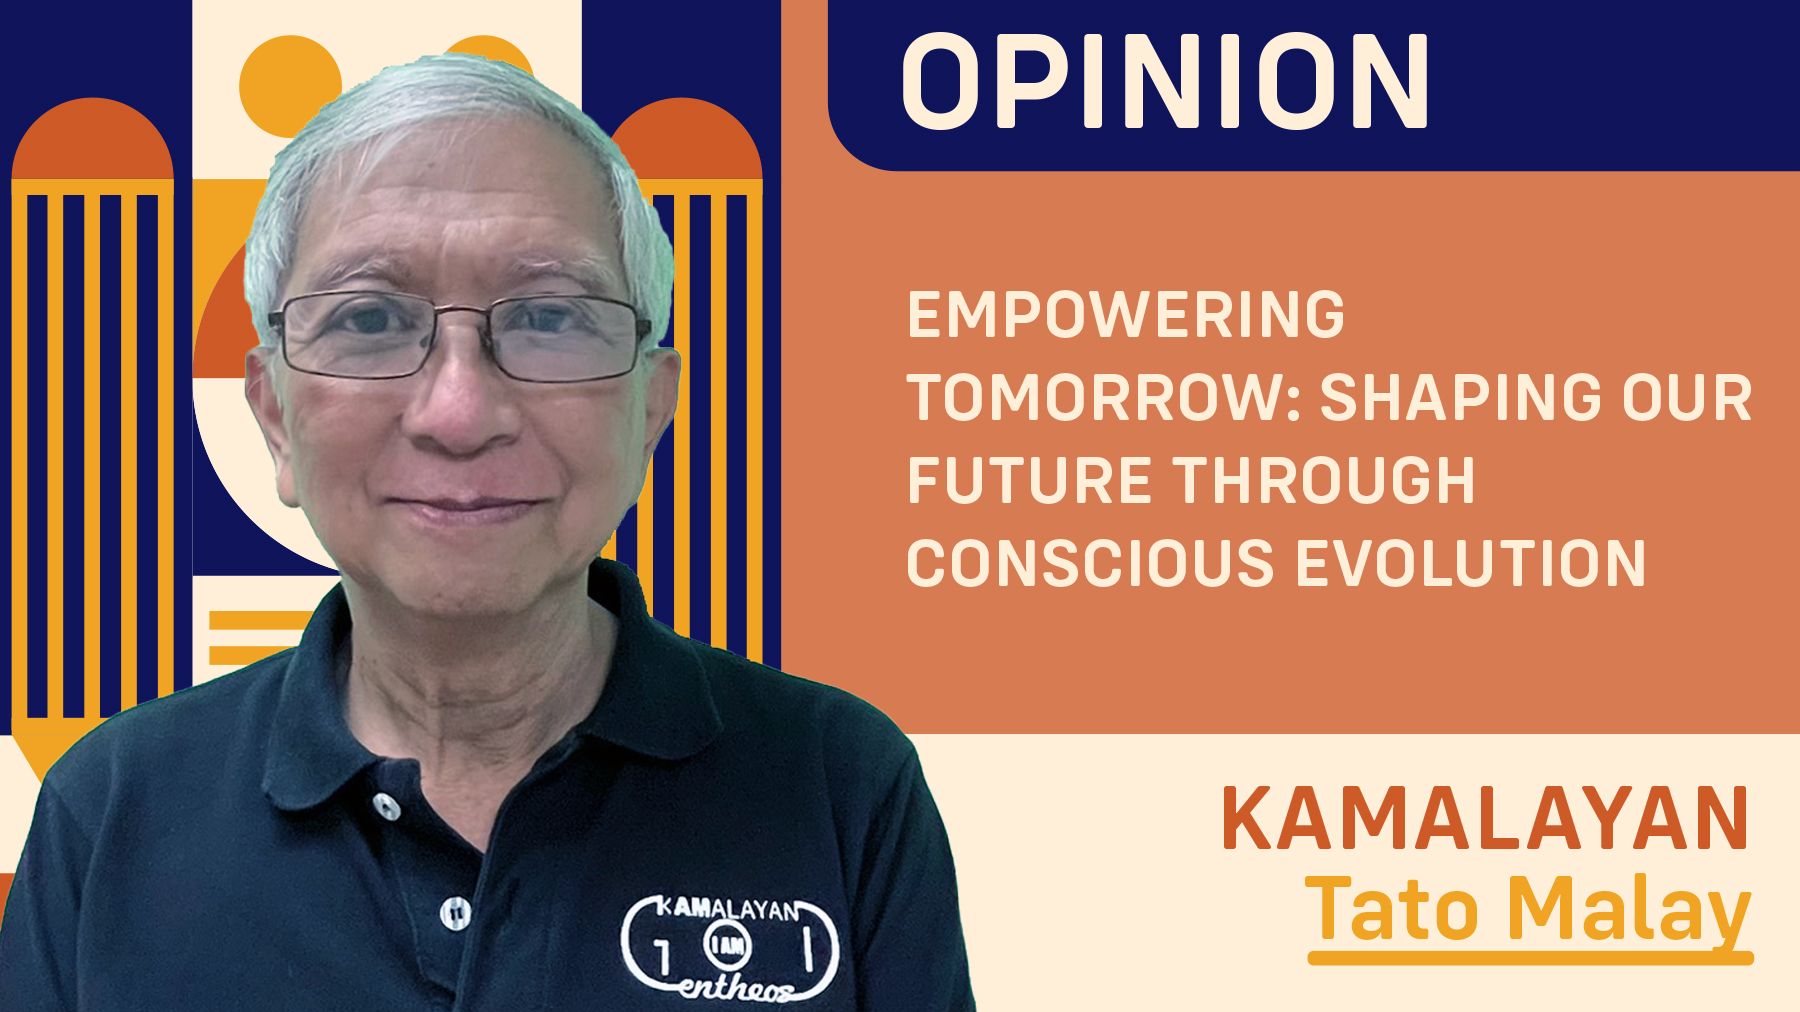 EMPOWERING TOMORROW: SHAPING OUR FUTURE THROUGH CONSCIOUS EVOLUTION 